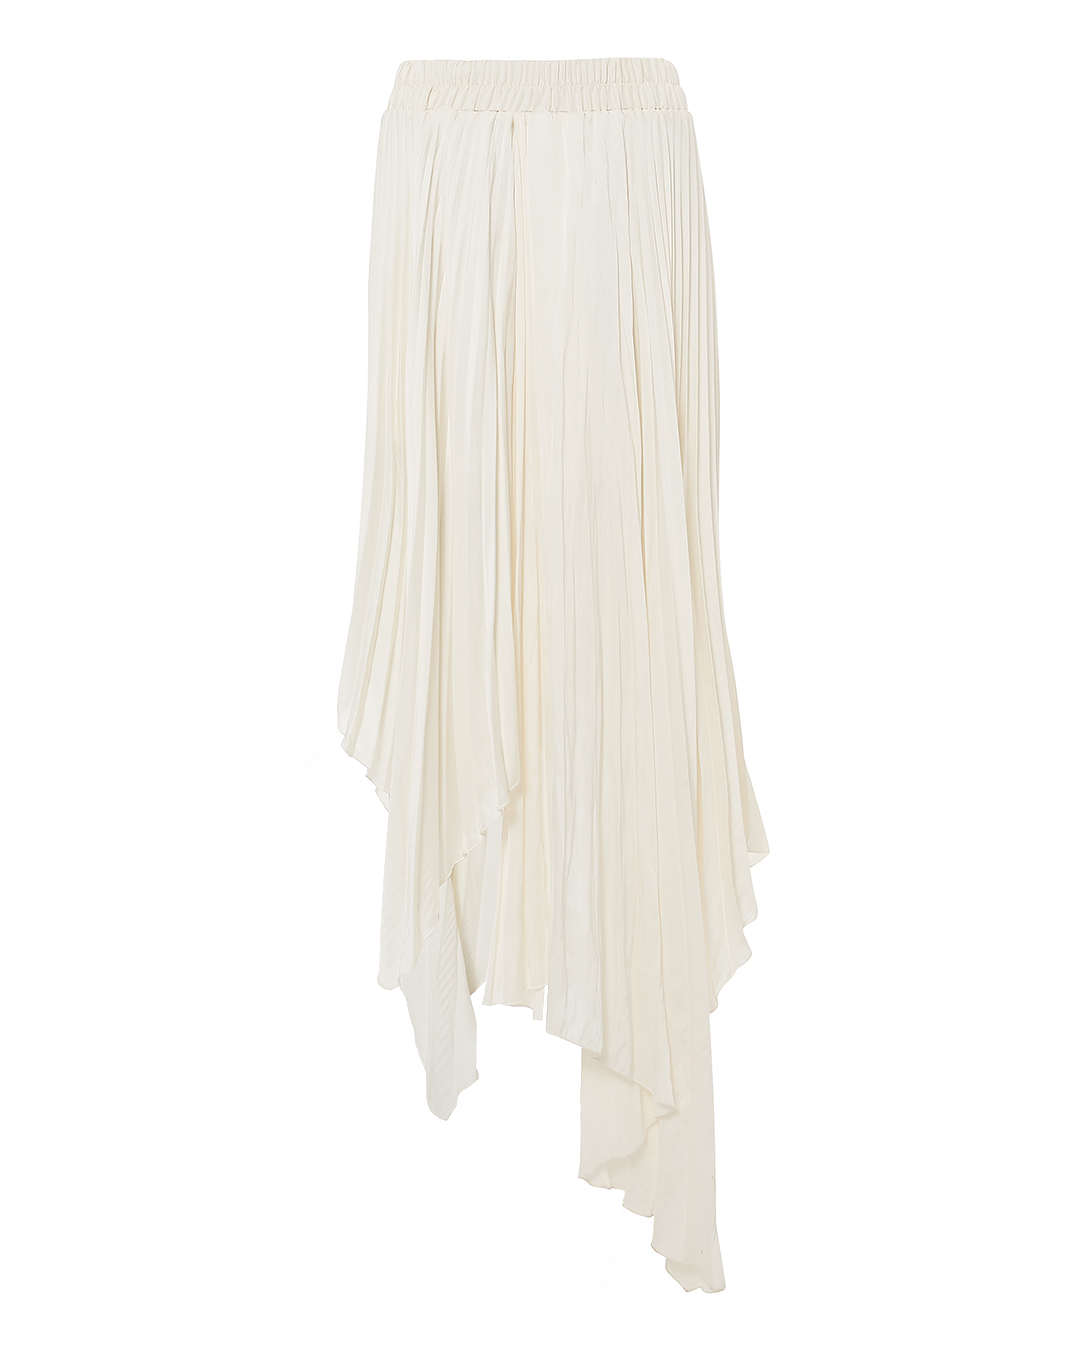 Sway With Me Maxi Skirt